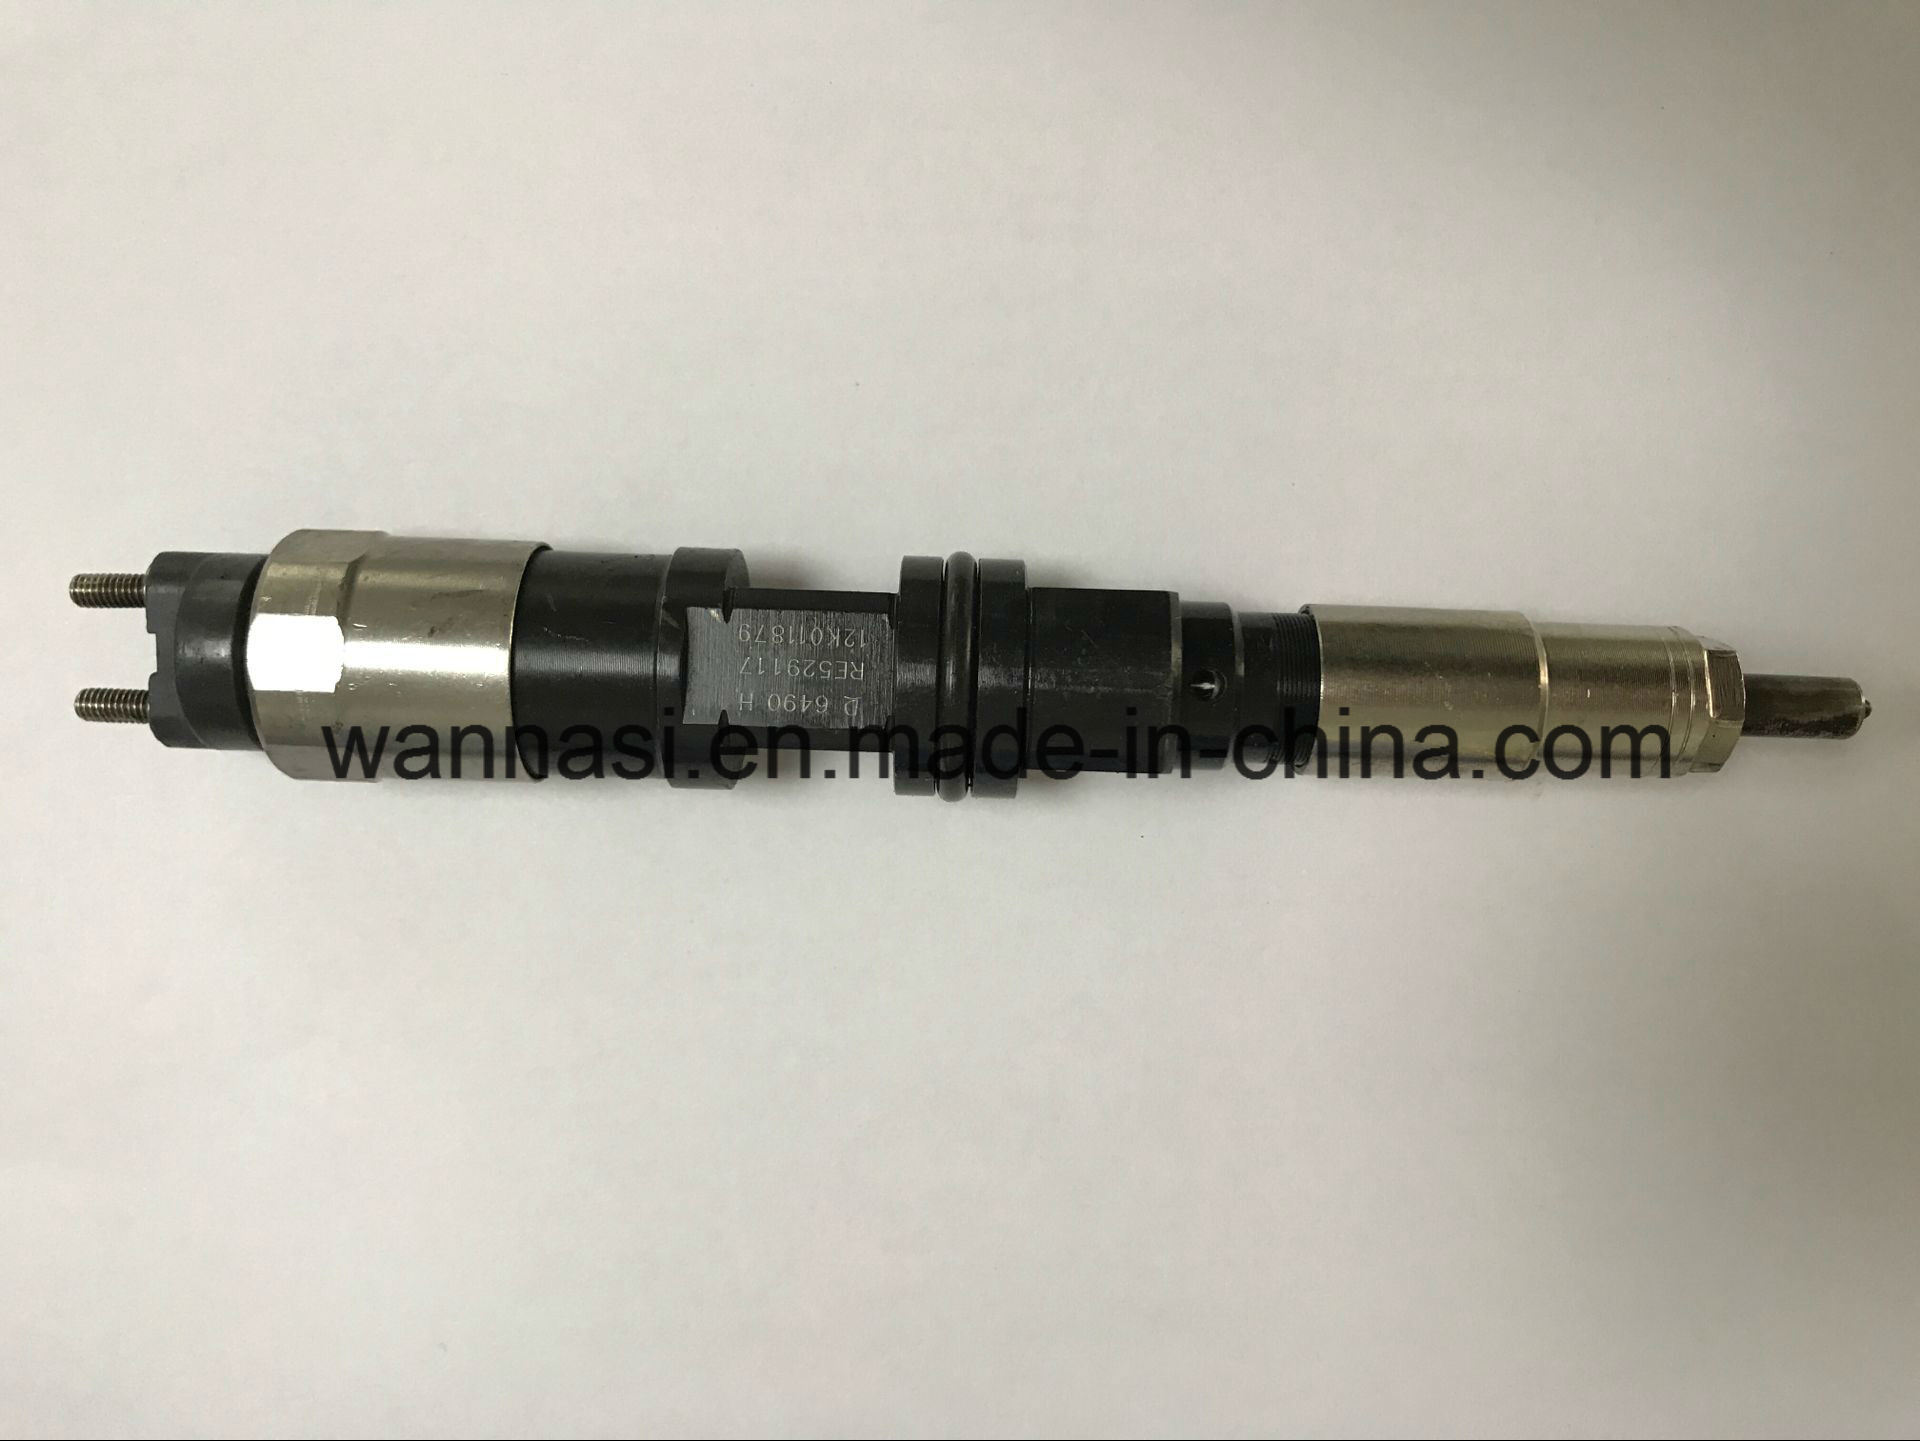 095000-6490 Diesel Common Rail Denso Fuel Injector